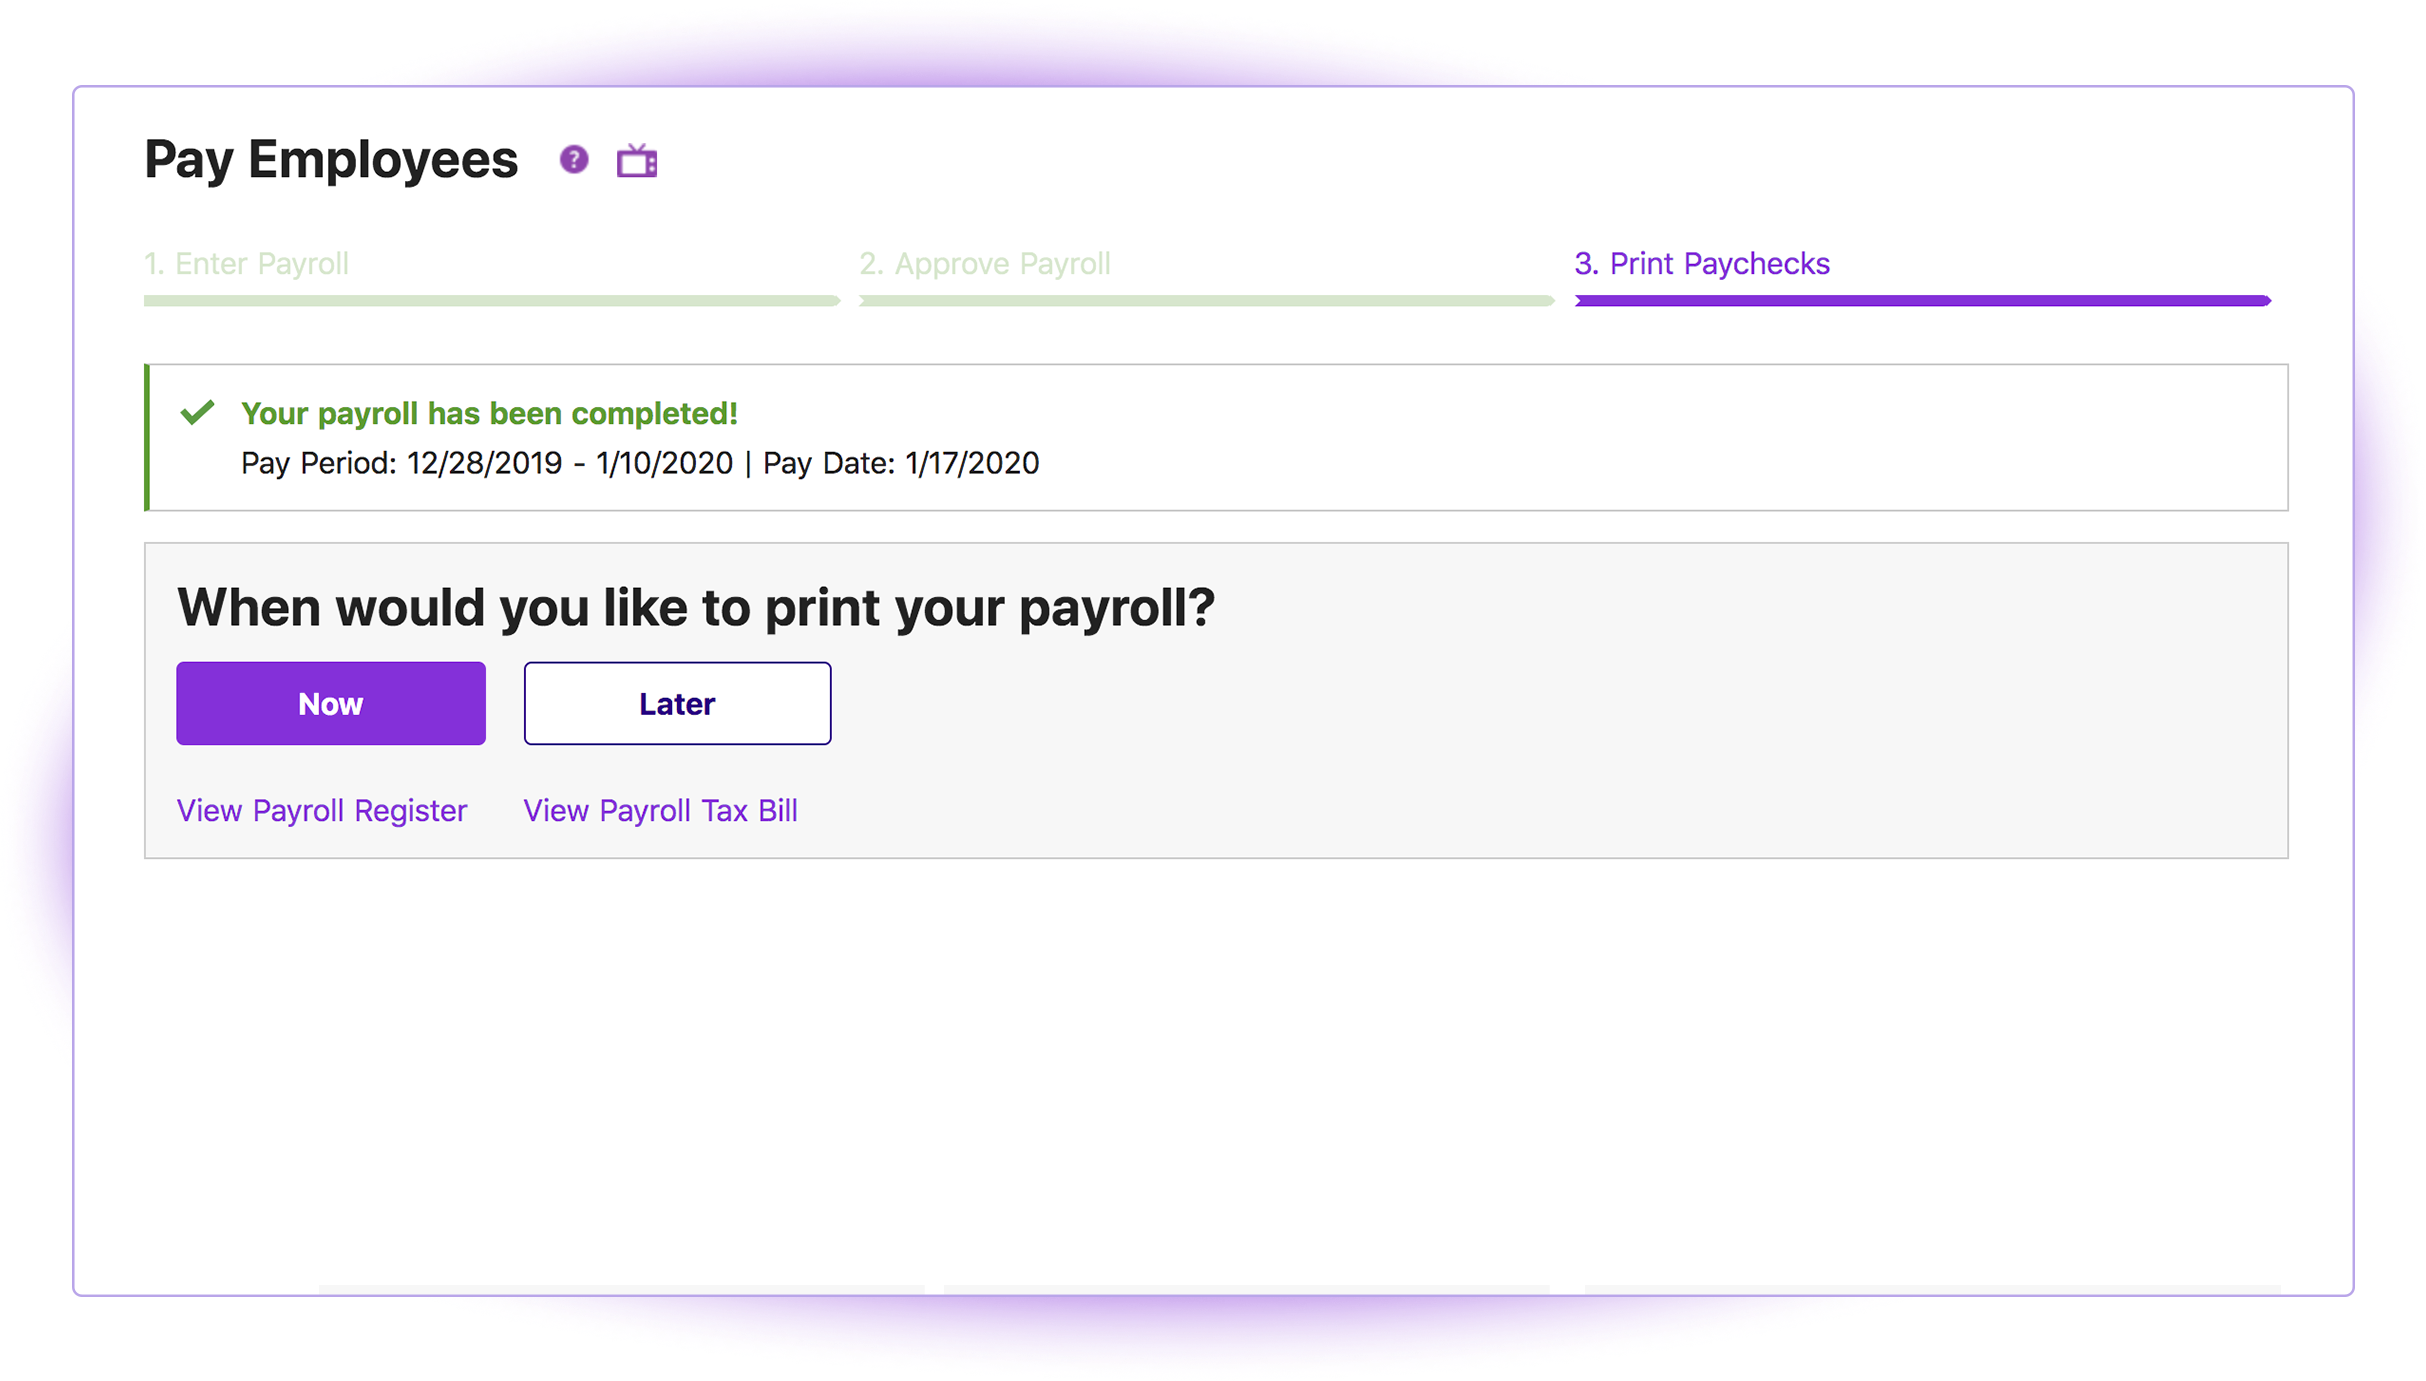 Patriot's Print Paychecks page in the payroll software.